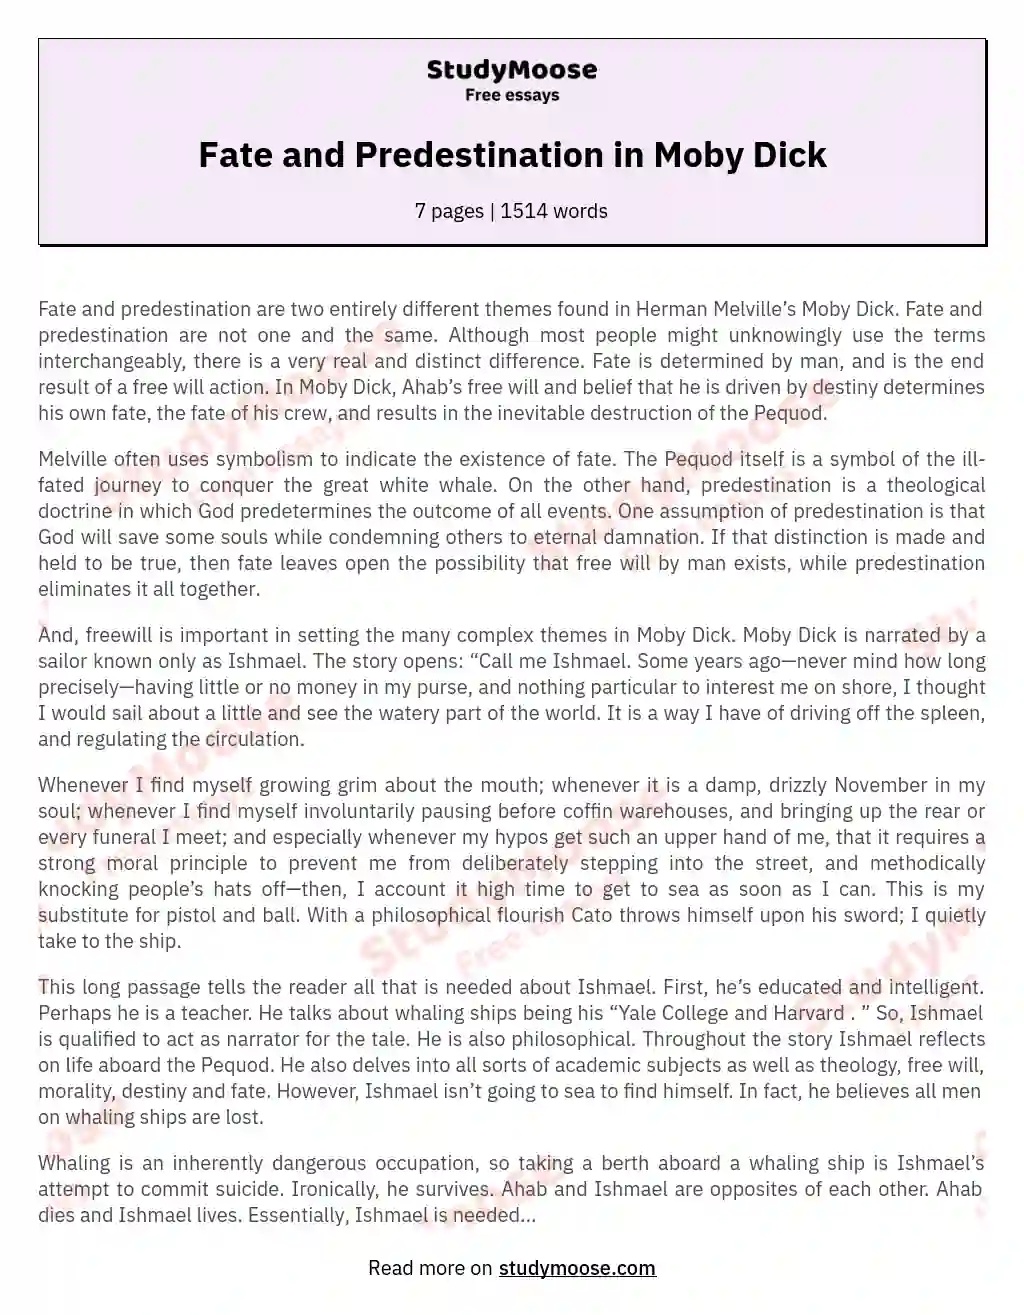 Fate and Predestination in Moby Dick